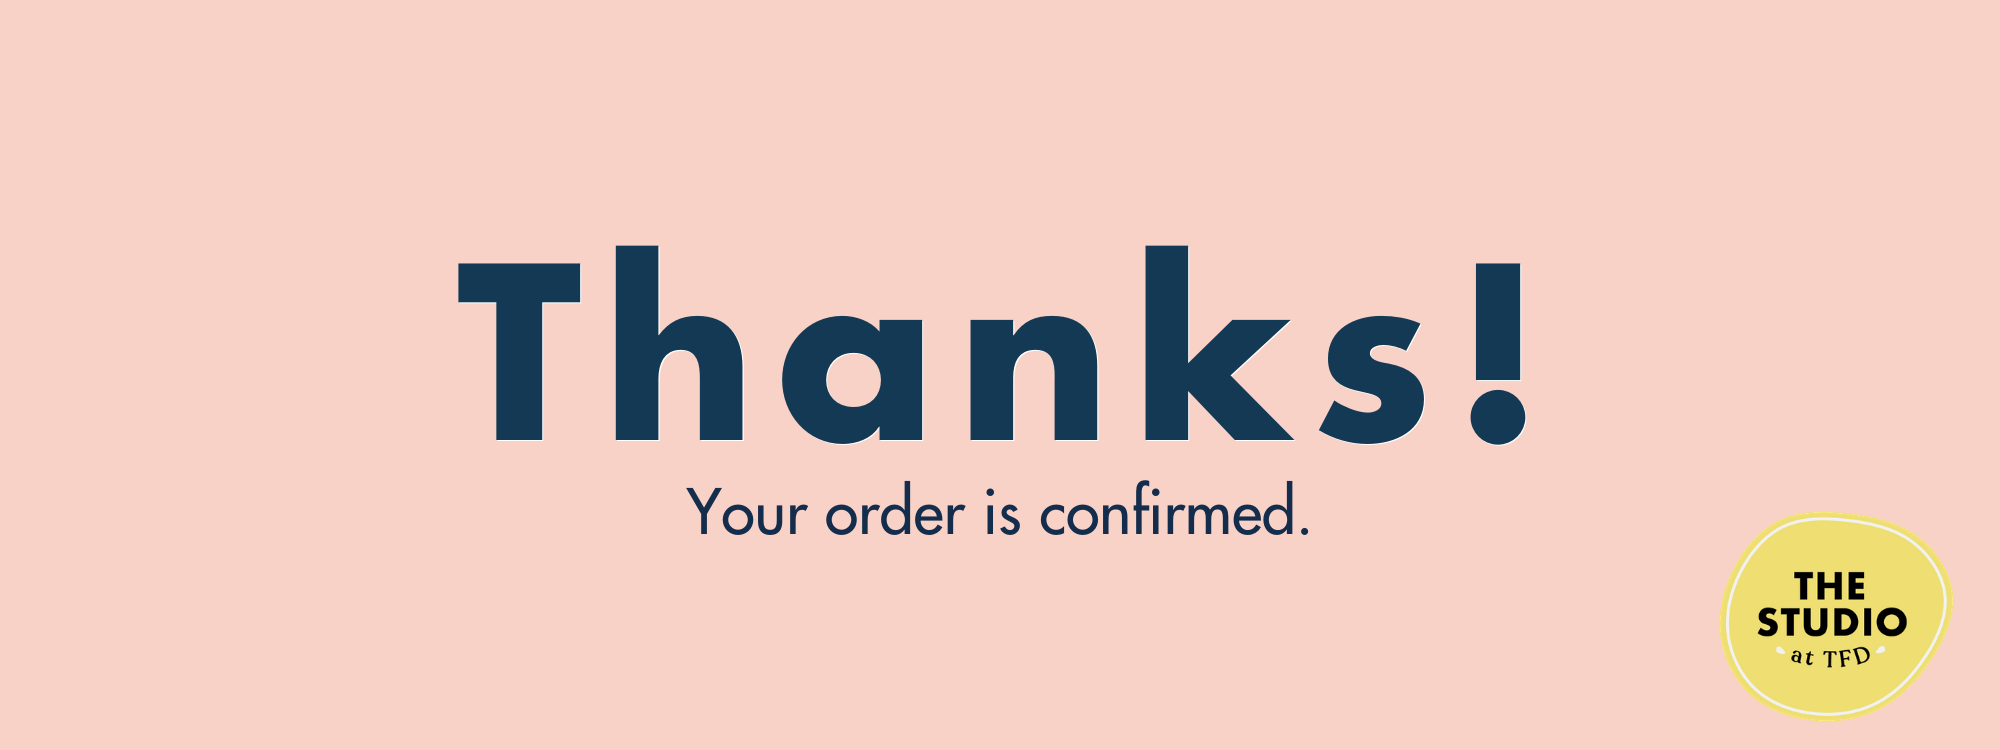 Thanks! Your order is confirmed.